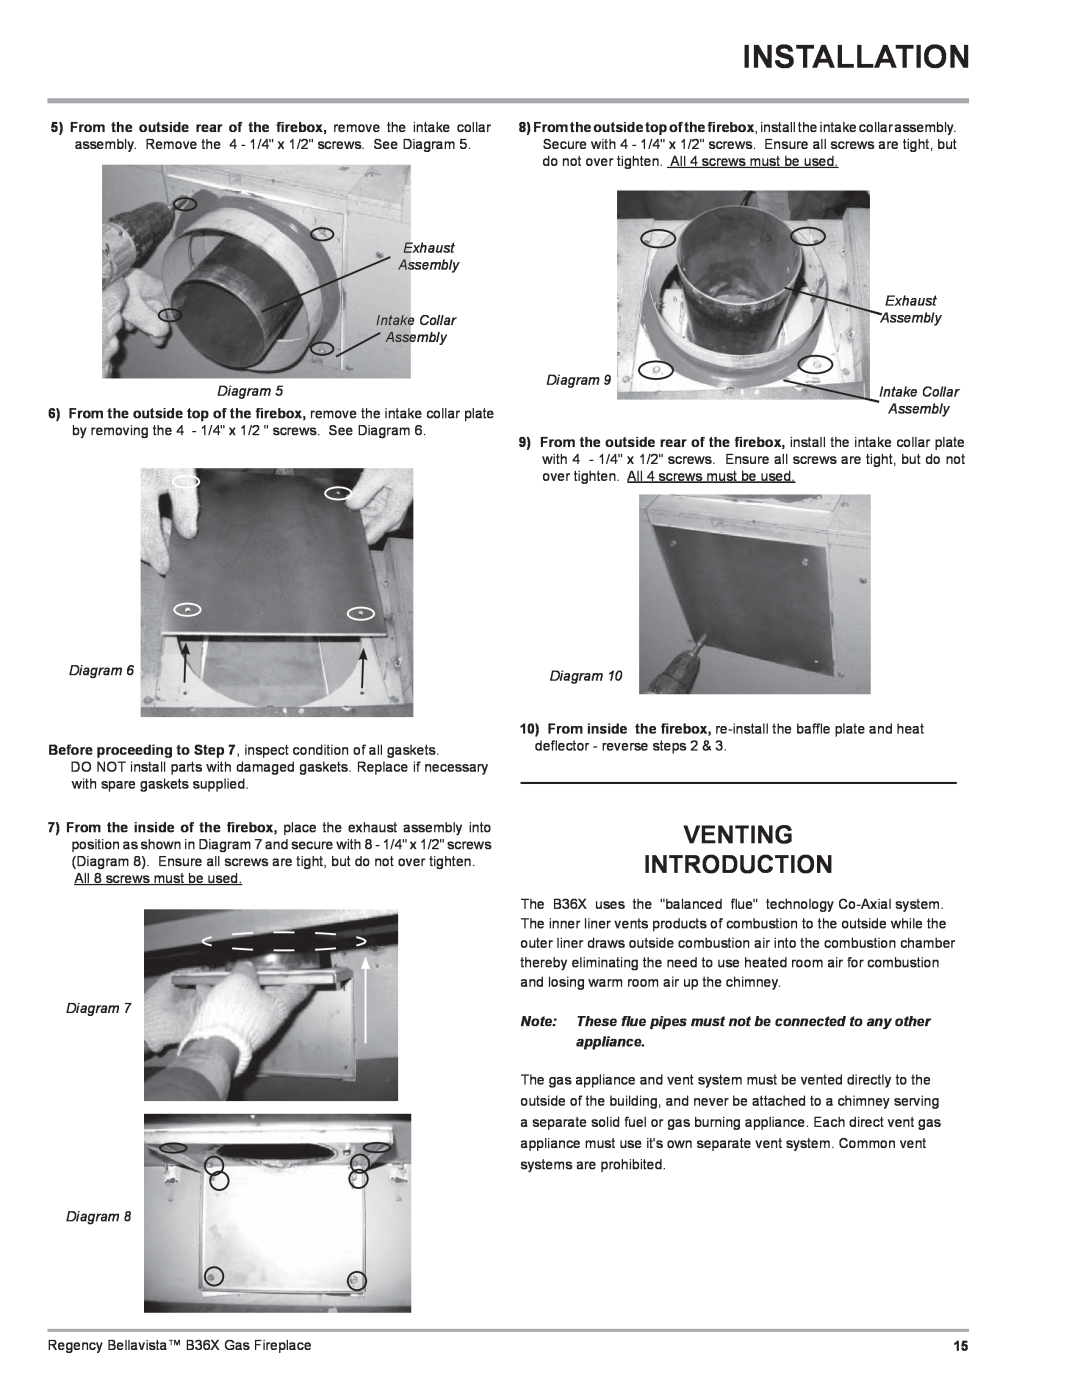 Regency B36X Installation, Venting Introduction, Exhaust Assembly Intake Collar Assembly Diagram, Diagram Diagram 